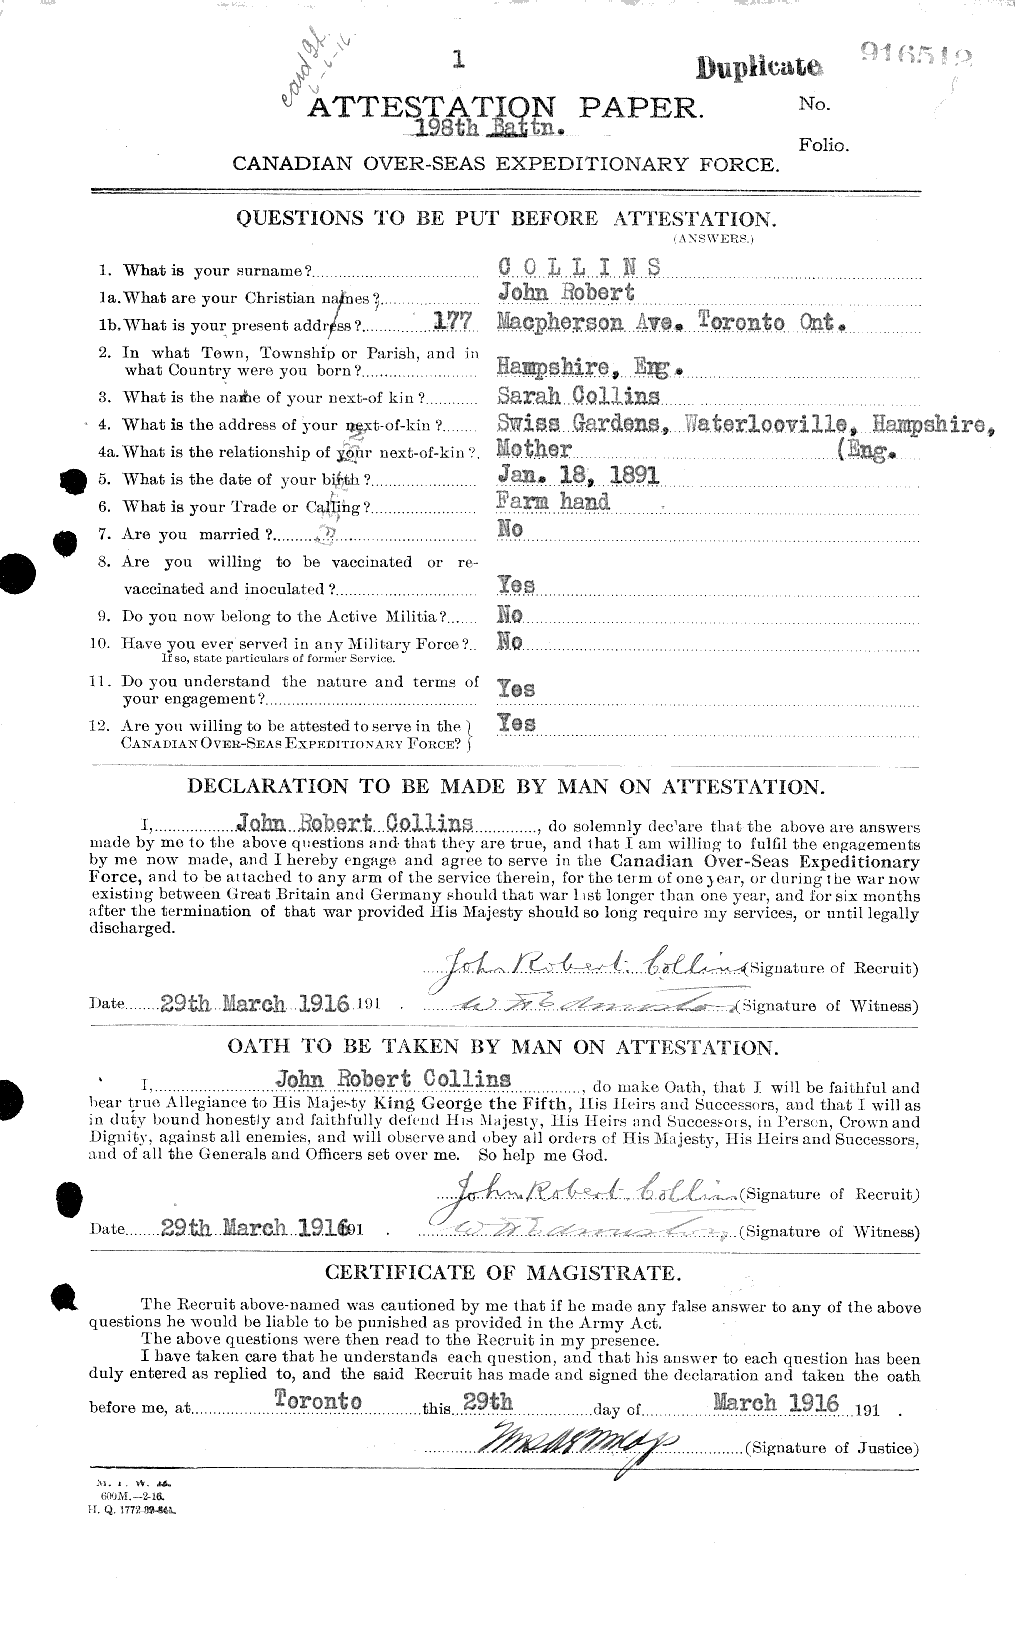 Personnel Records of the First World War - CEF 034381a